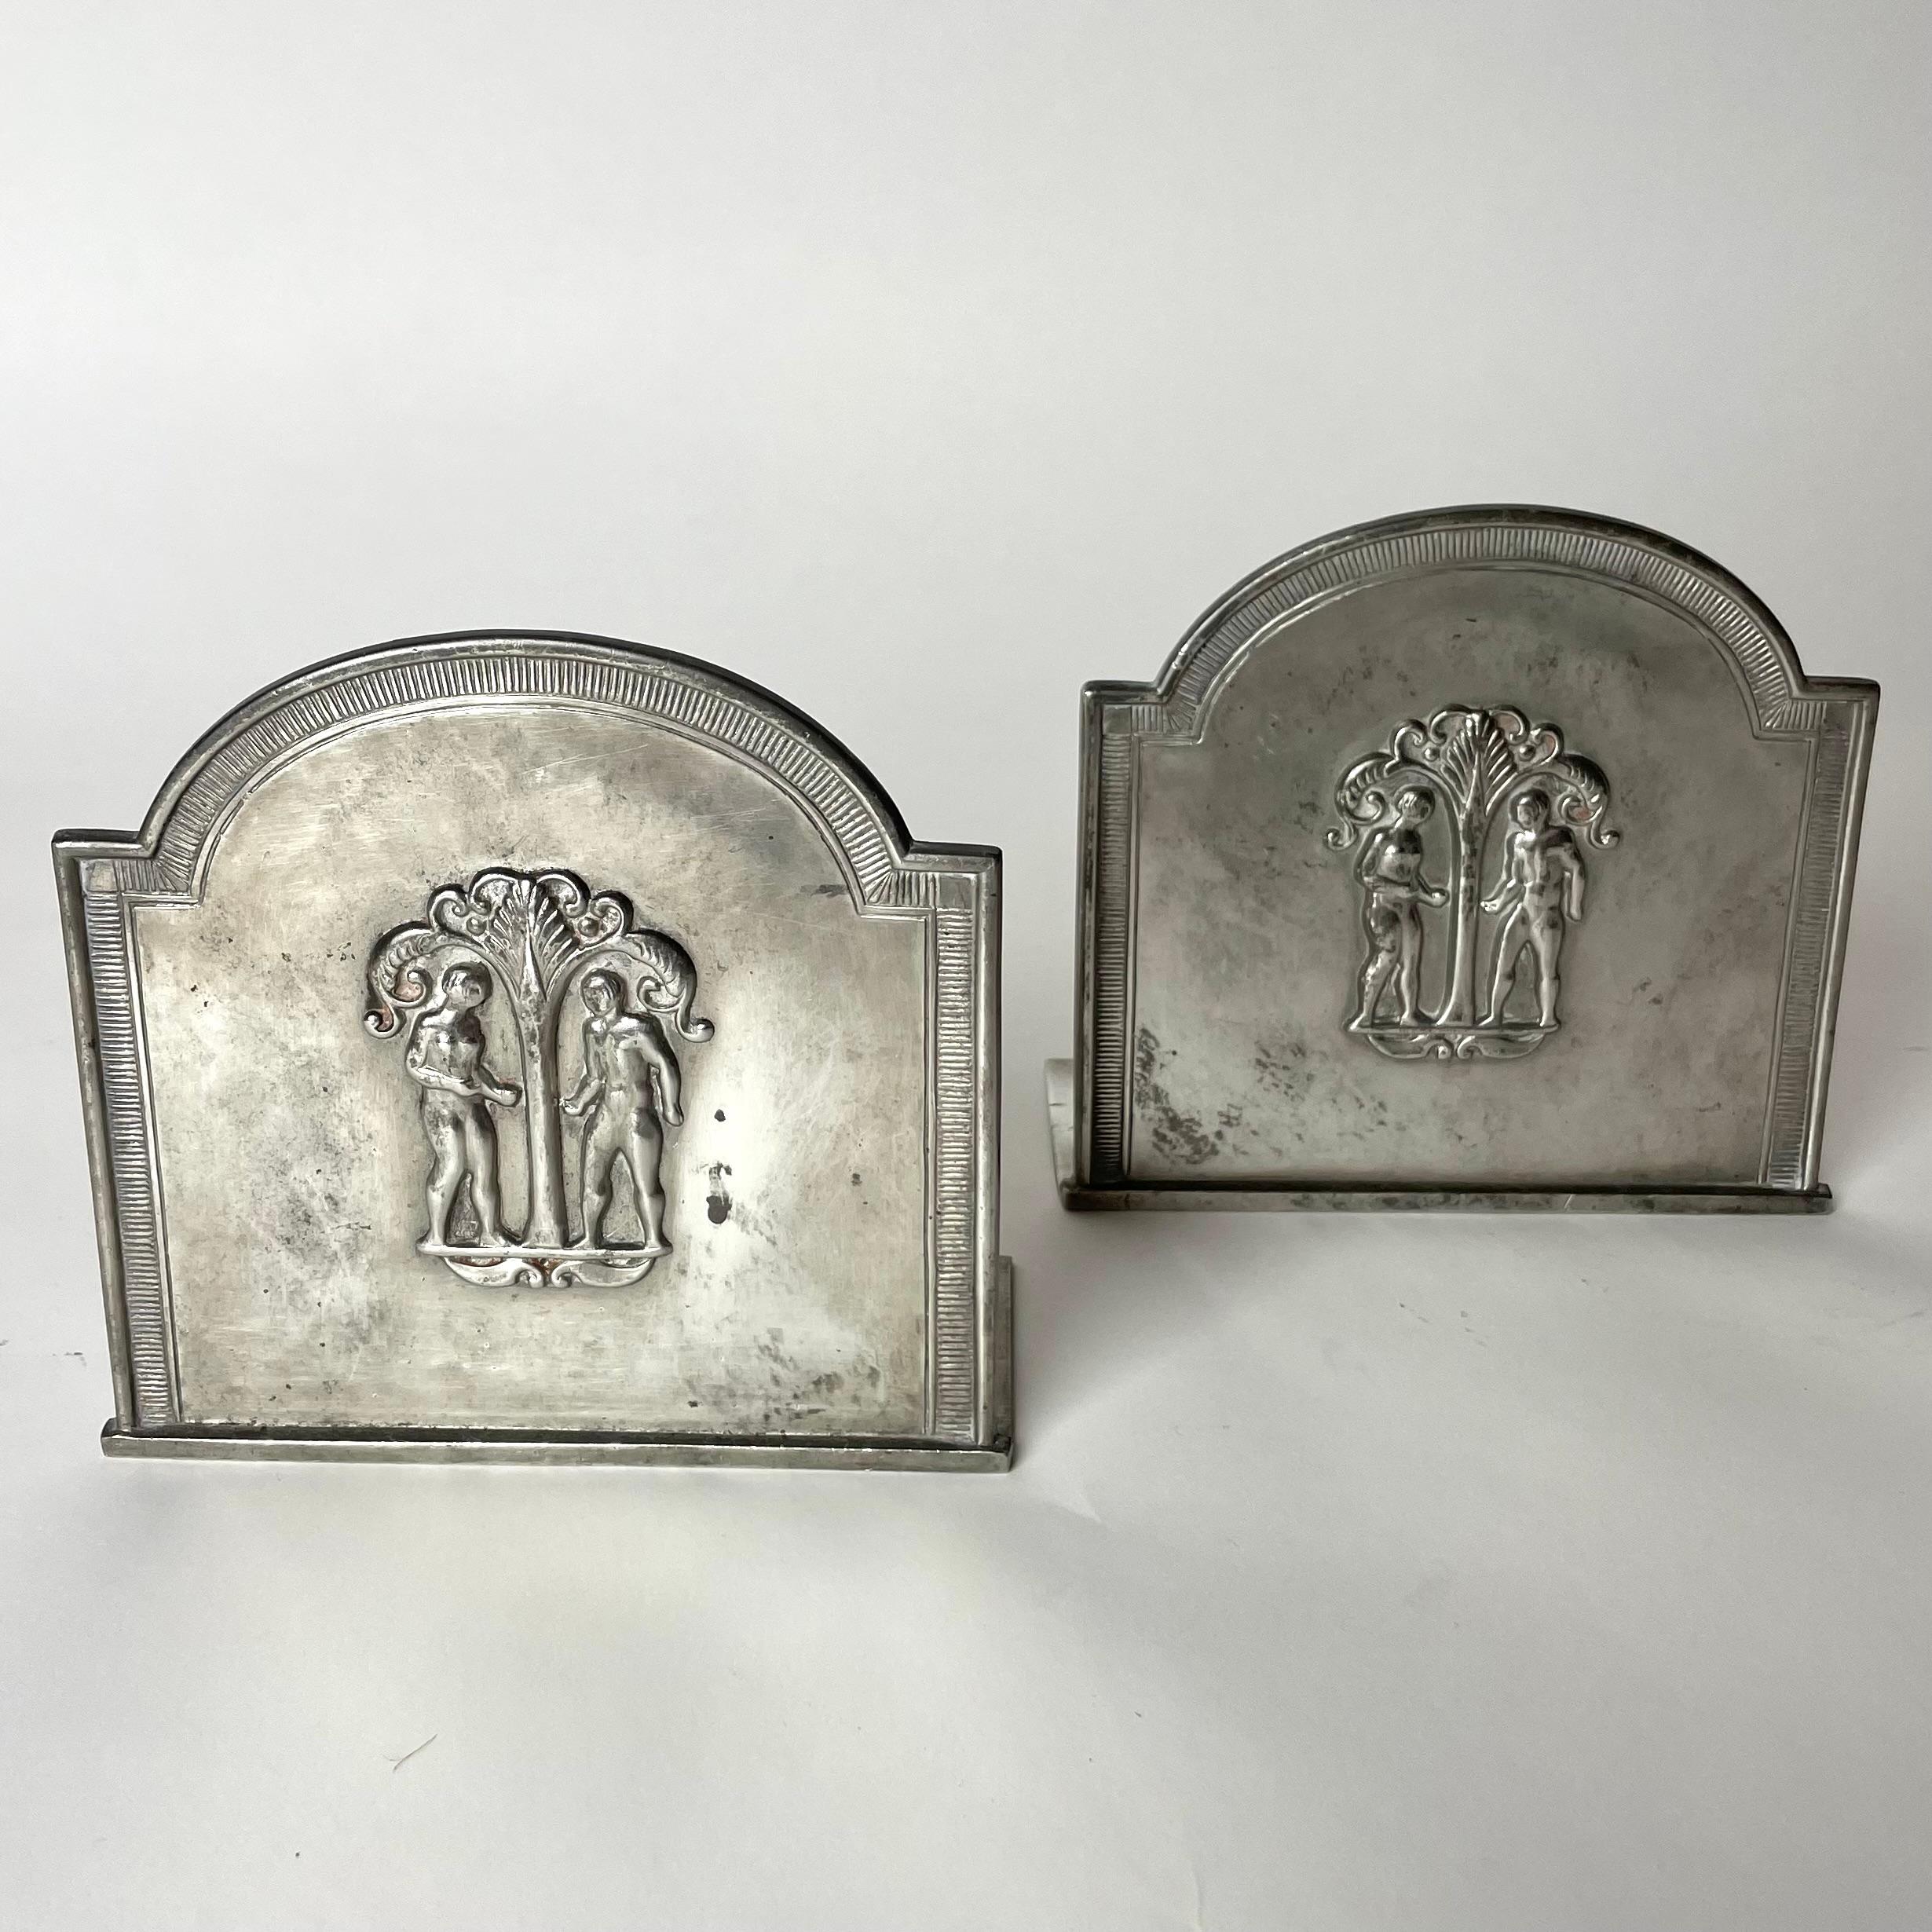 Art Deco Pair of Bookends in Pewter with decoration of Adam and Eve by Just Andersen 1930 For Sale